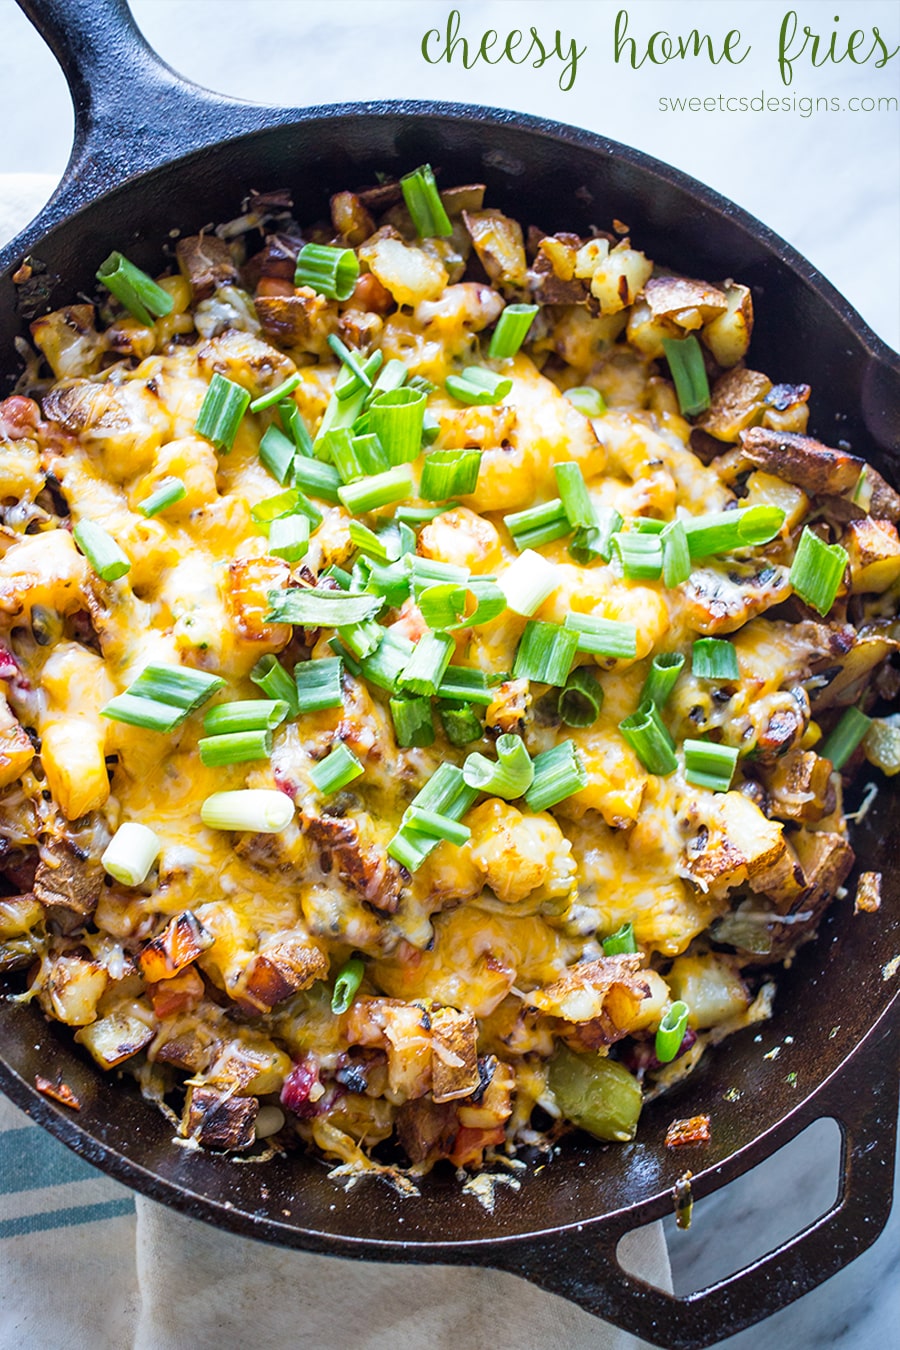 Cheesy home fries- these are so delicious and easy!